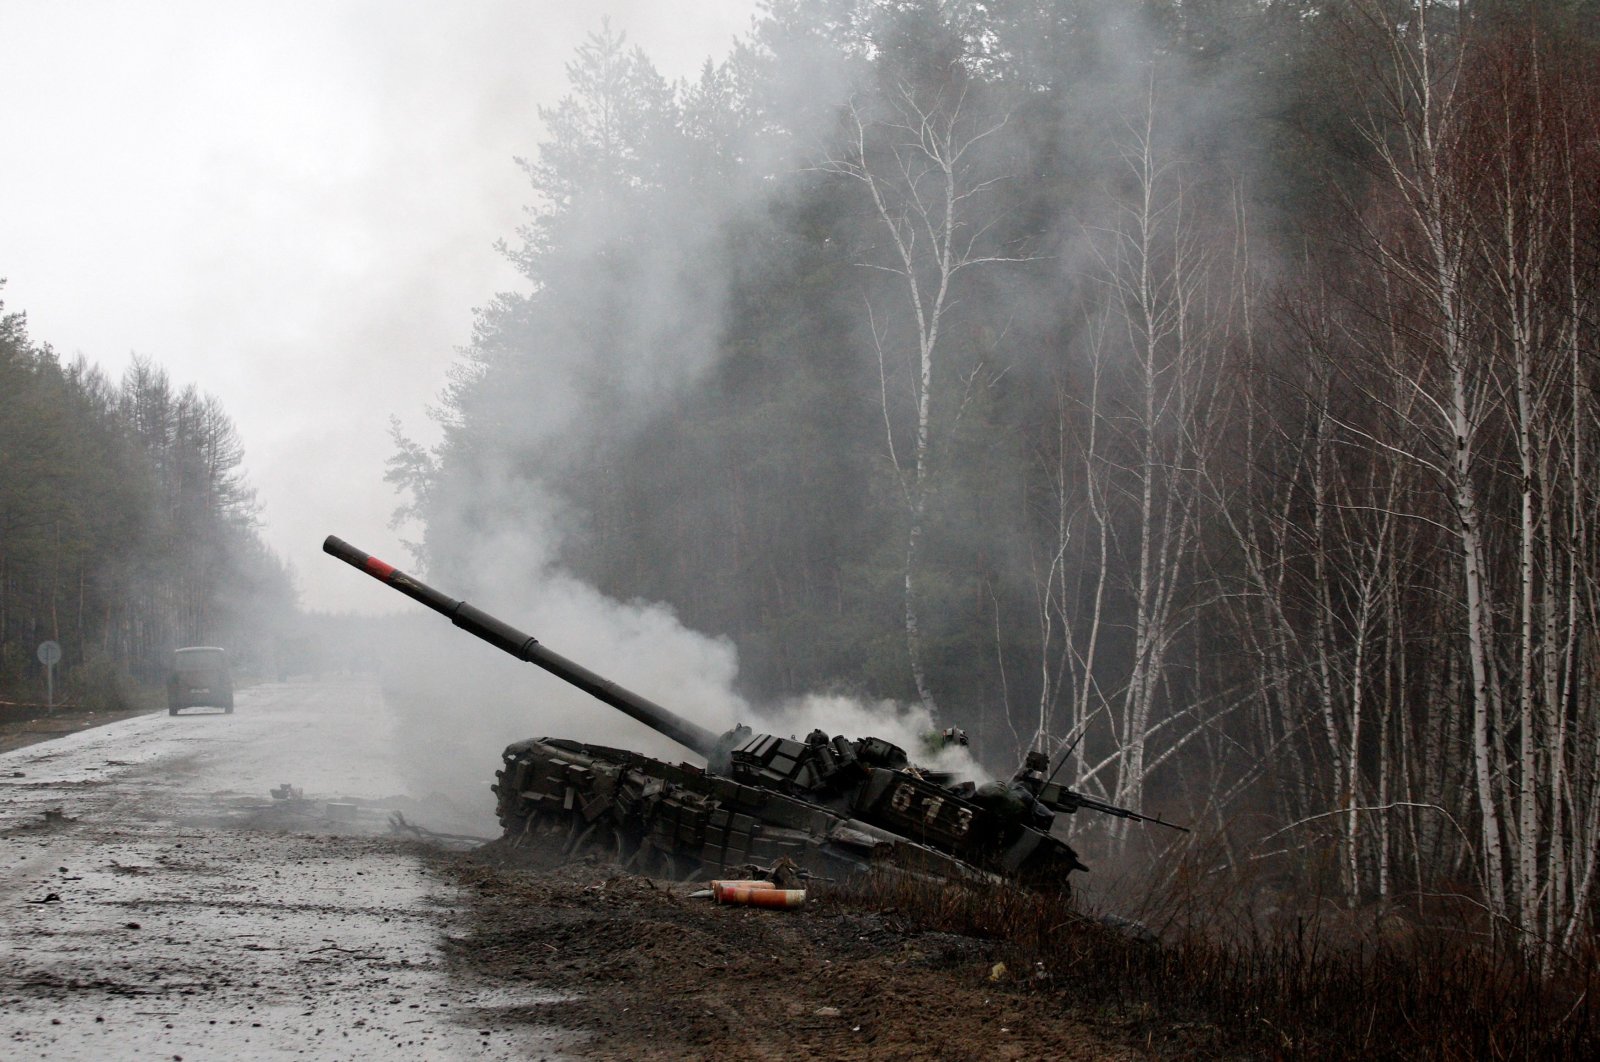 Smoke rises from a Russian tank destroyed by Ukrainian forces on the side of a road in the Luhansk region, Ukraine, Feb. 26, 2022. (AFP Photo)